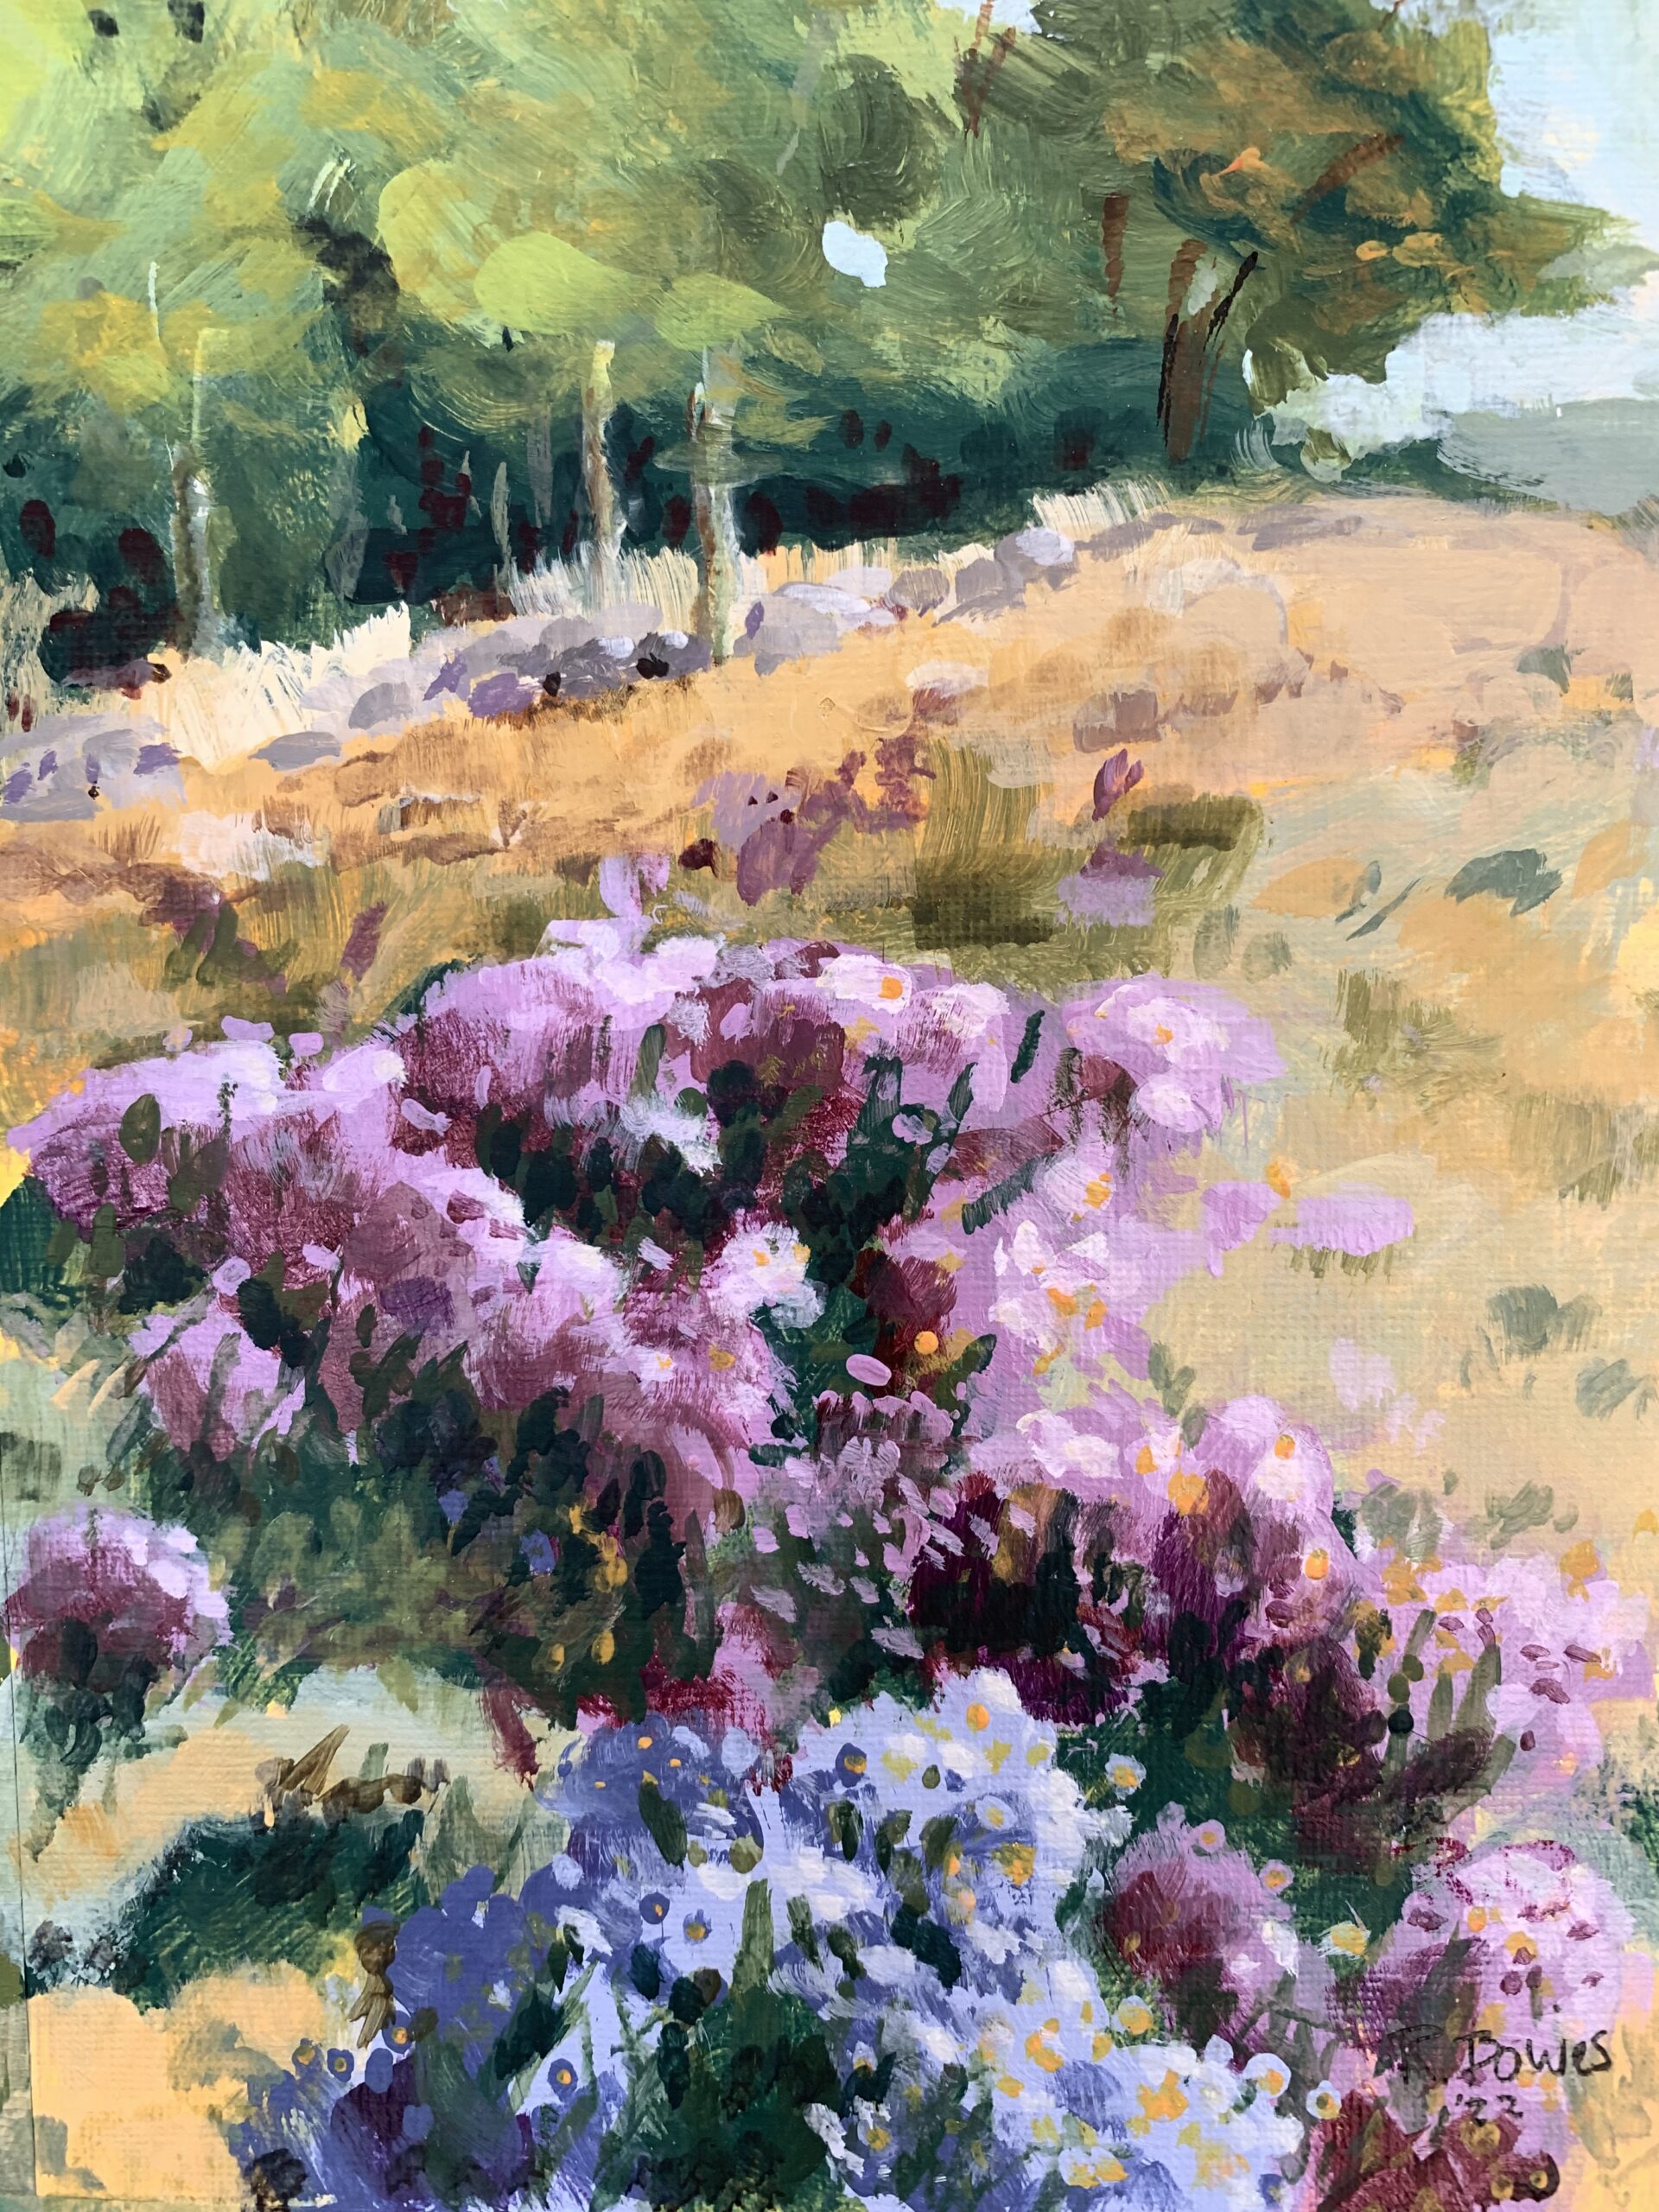 New England Asters, acrylic on canvaspaper, matted, $60. Rebecca Bowes. The artist has designated 100% of this sale to go to the library fund.